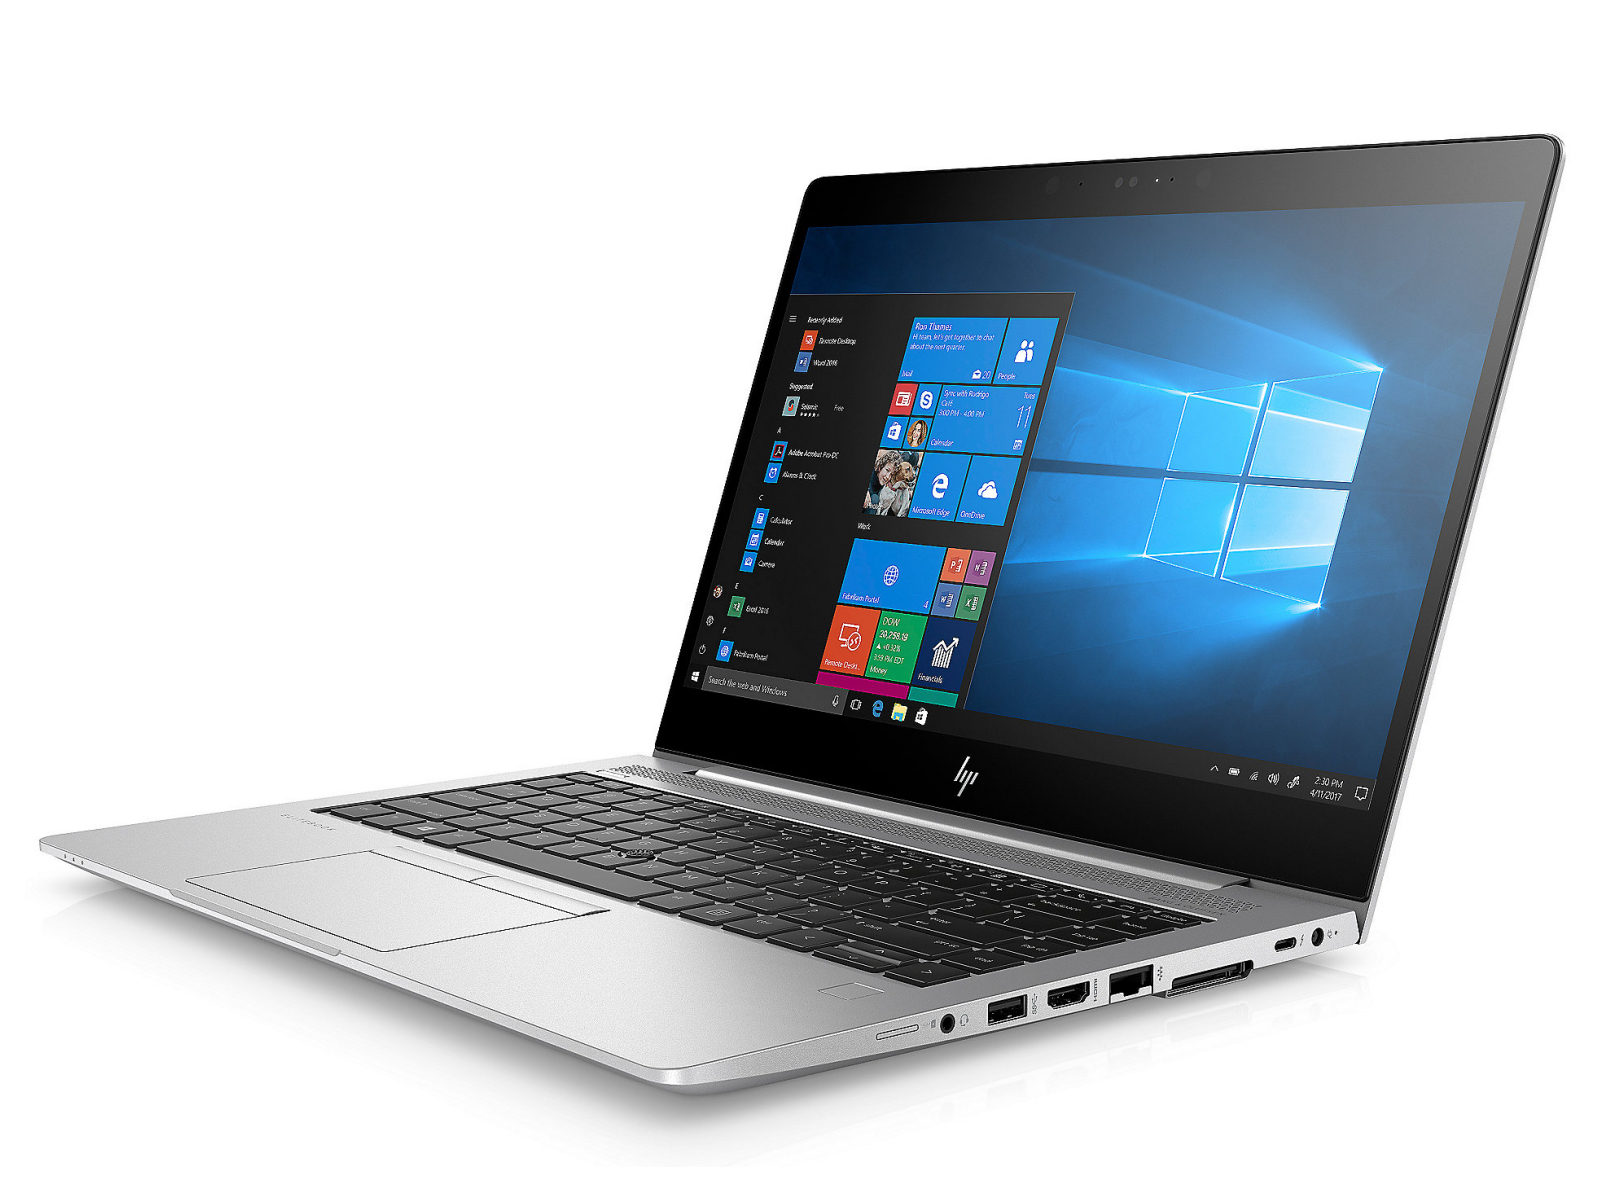 HP EliteBook 840 G5 Reviews, Pros and Cons